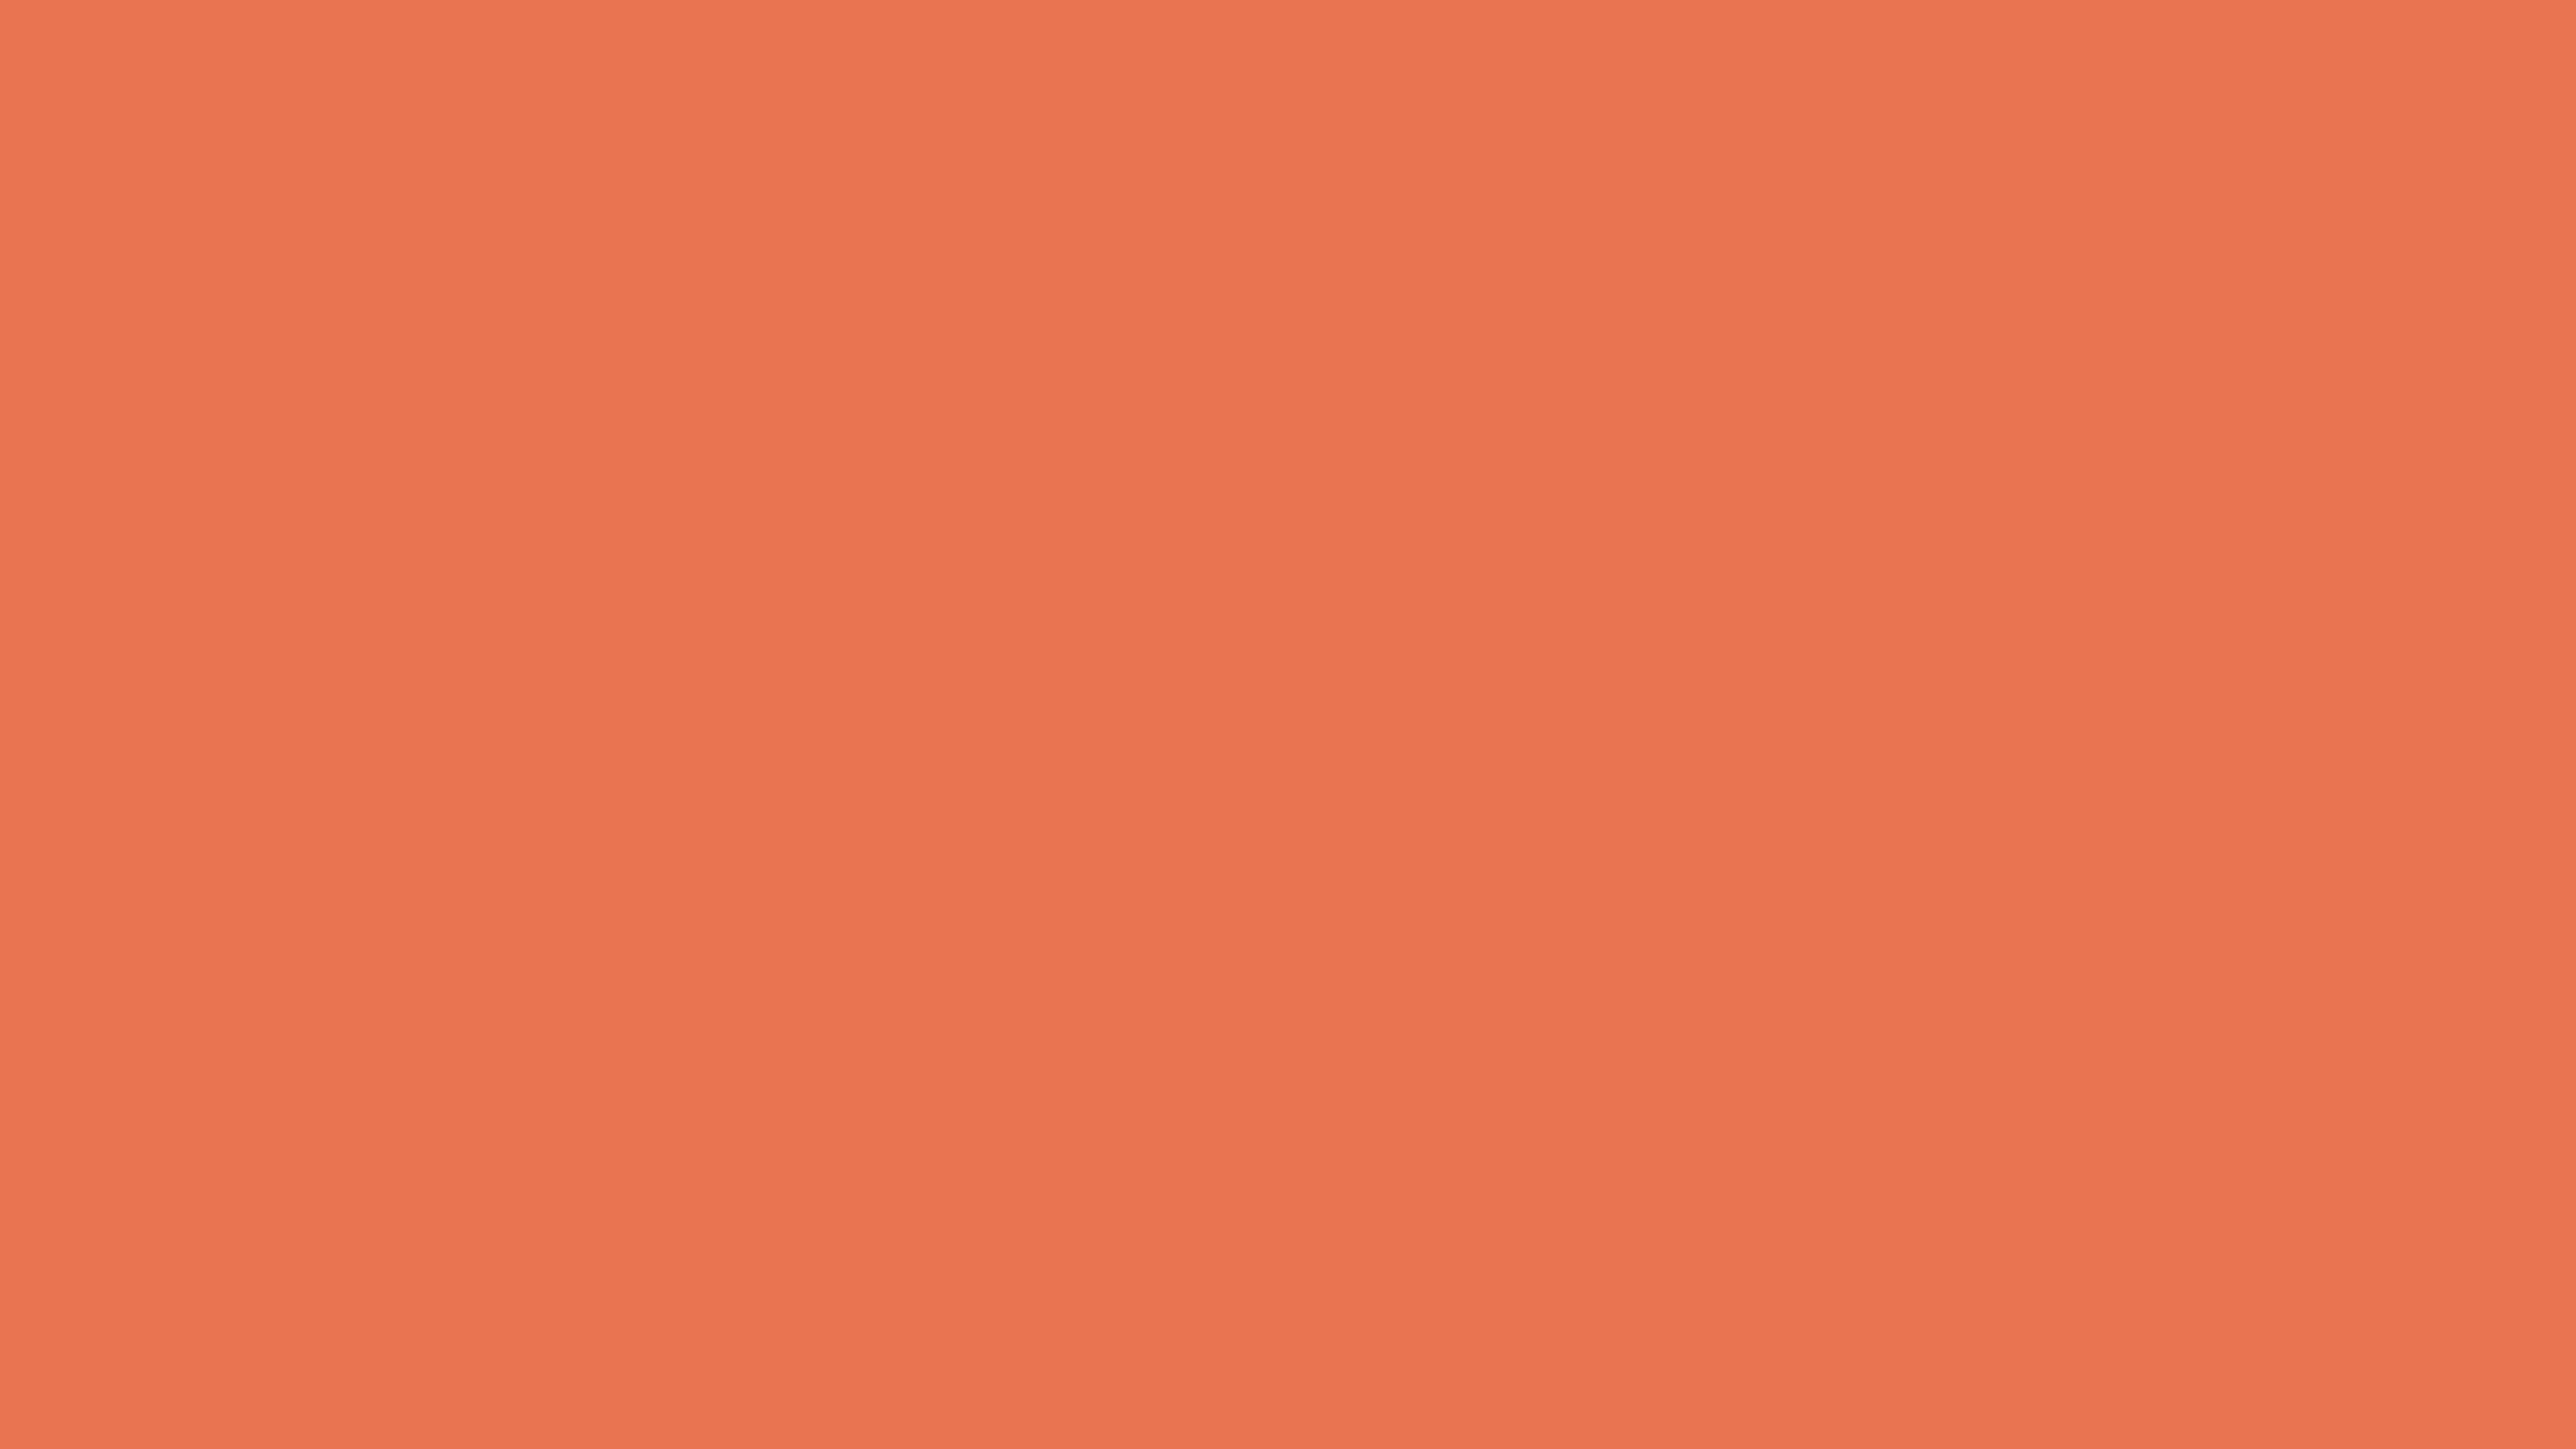 4096x2304 Burnt Sienna Solid Color Background